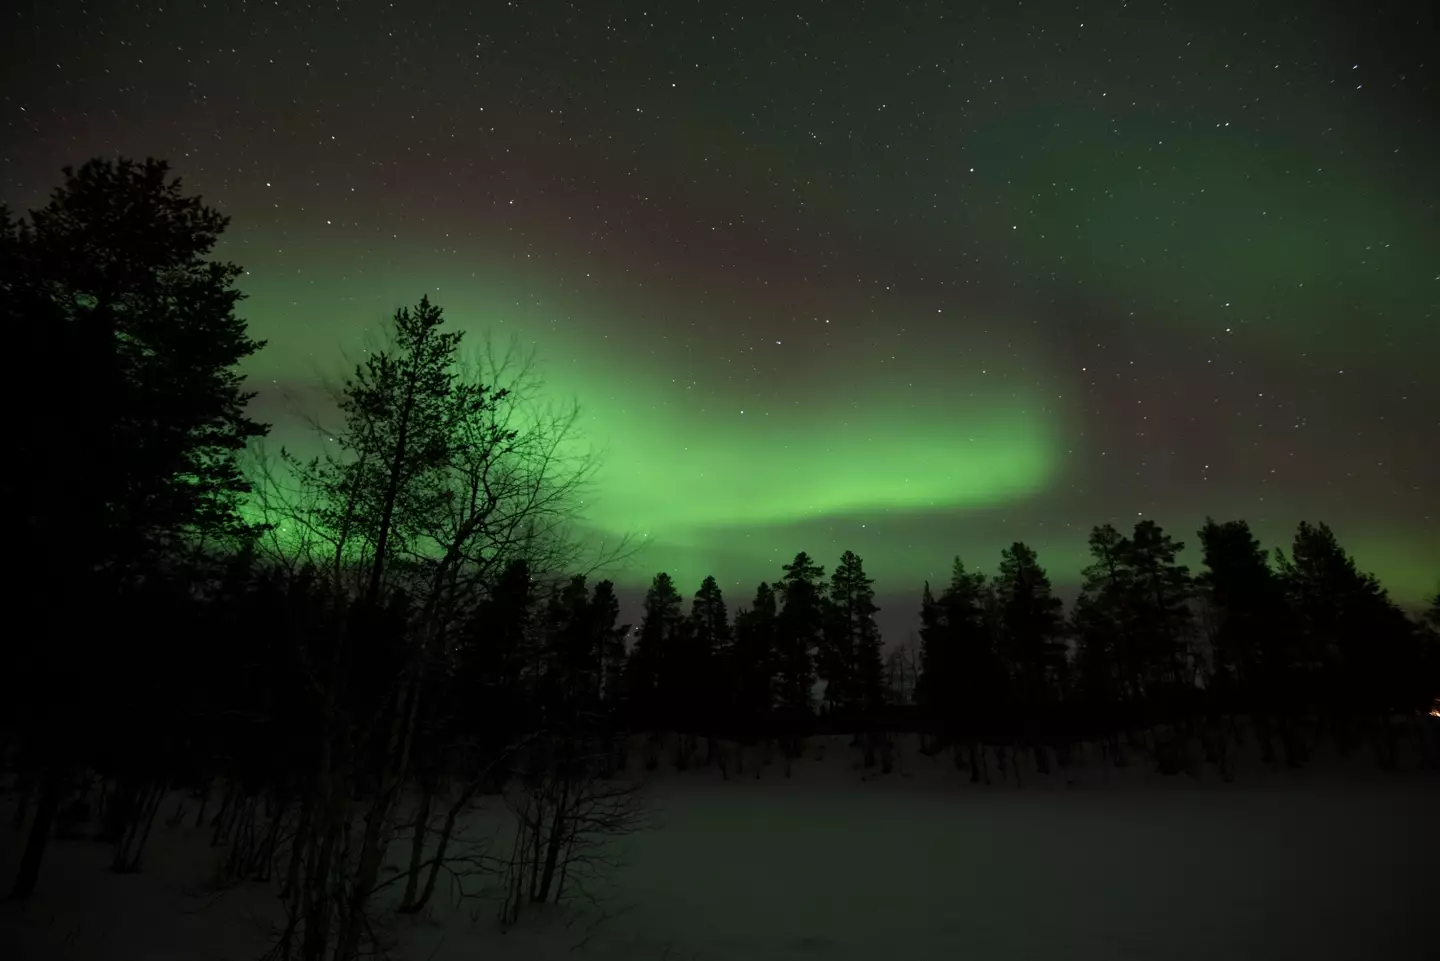 The event is named after Aurora Borealis - aka the Northern Lights (